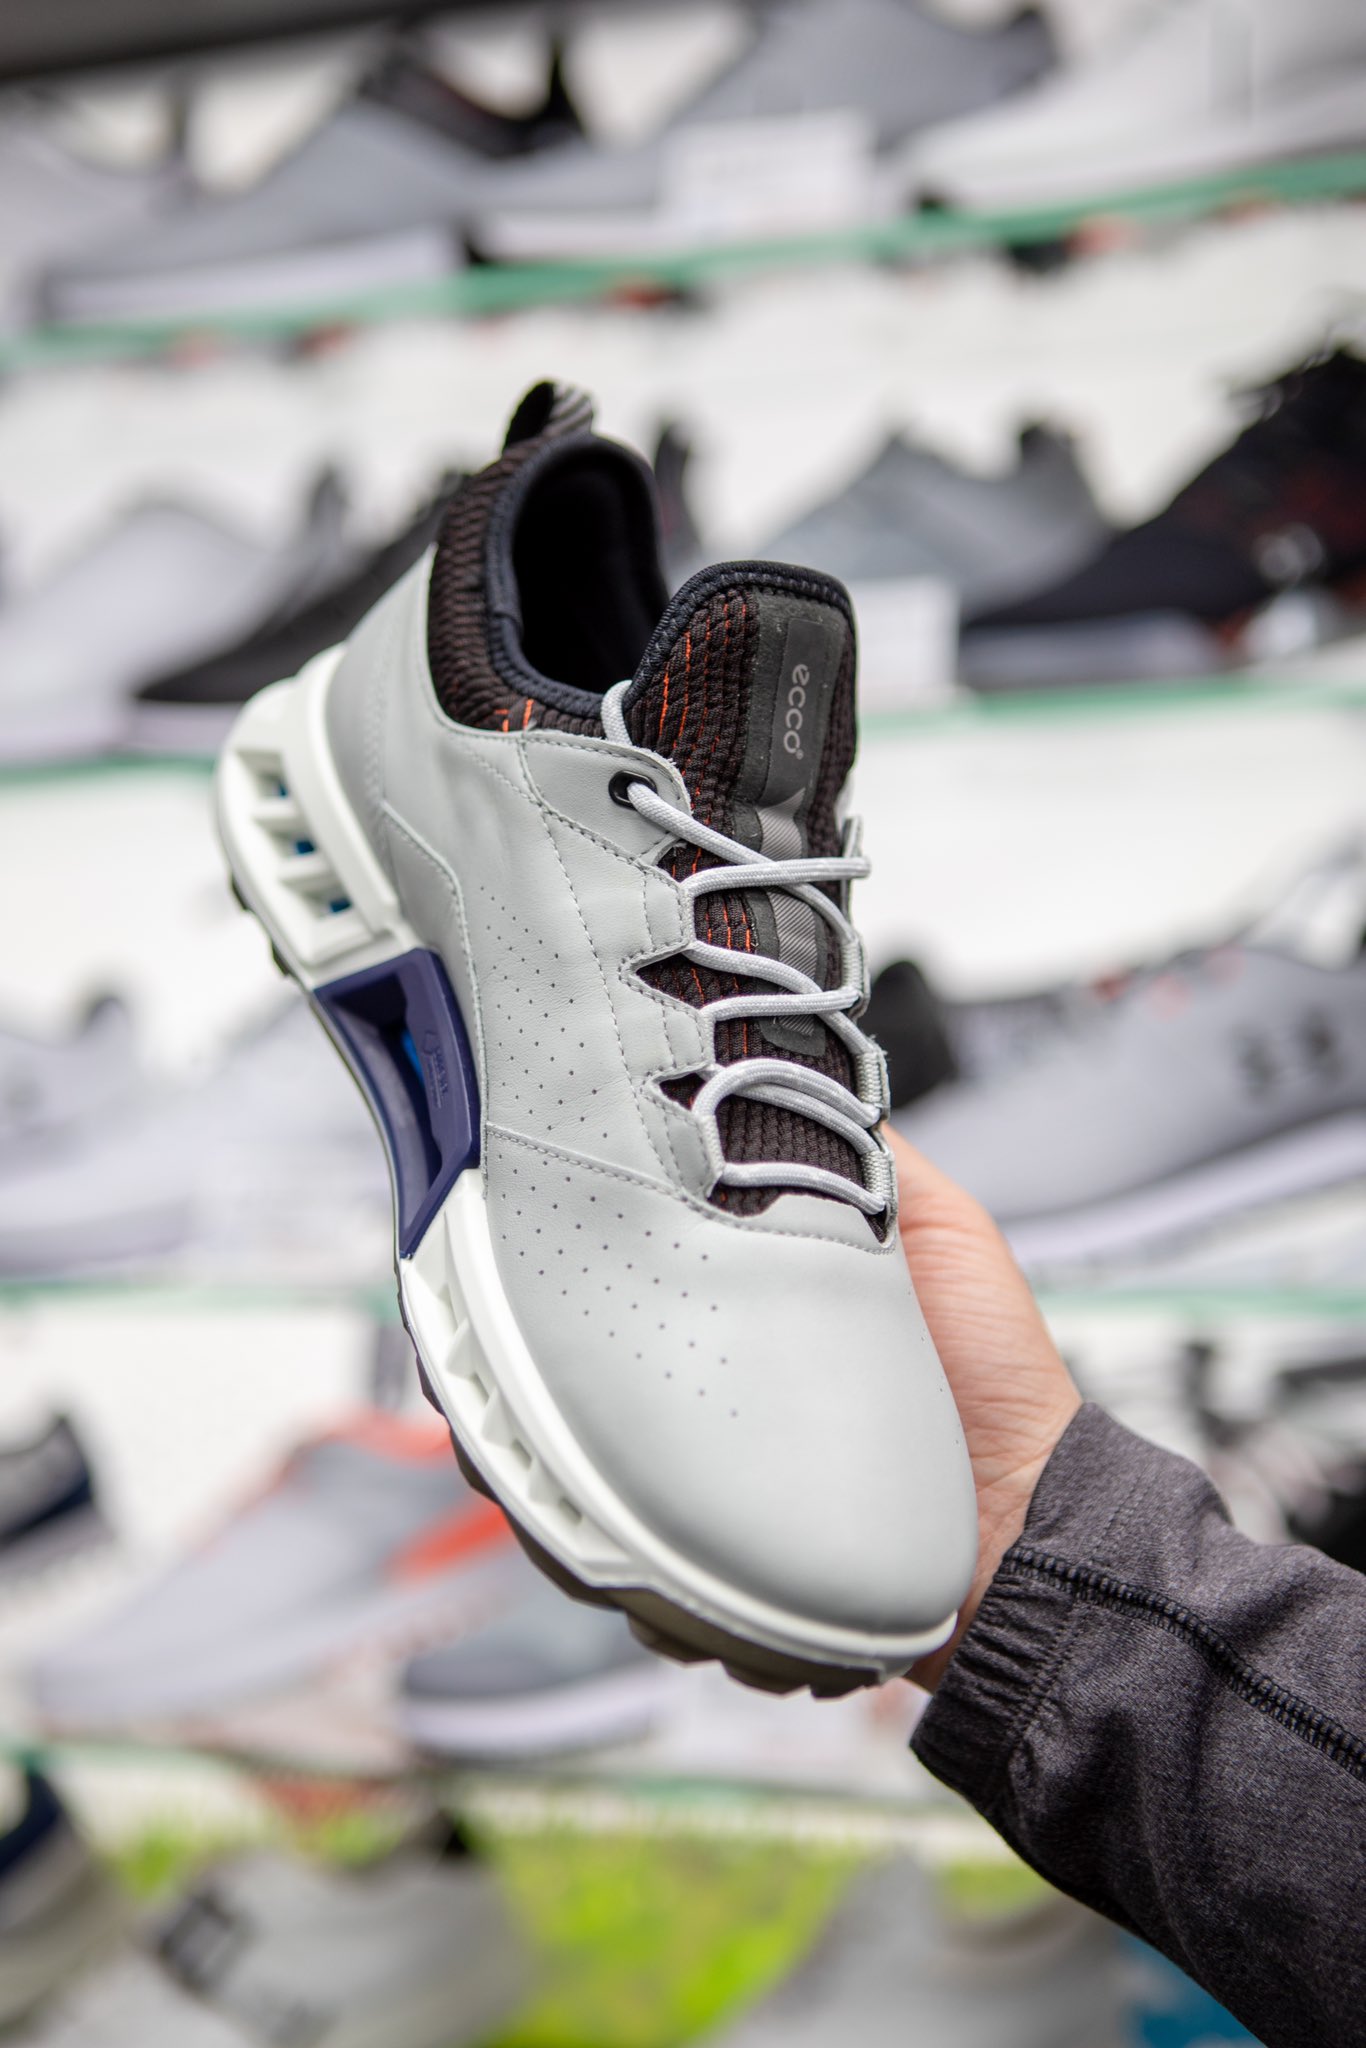 Hende selv erhvervsdrivende Sprængstoffer Silvermere Golf on Twitter: "WIN a pair of Ecco BIOM C4 men's golf shoes!  To enter, simply – Like &amp; Retweet this post Follow @silvermeregolf  Competition will run until 23:59 on Sunday